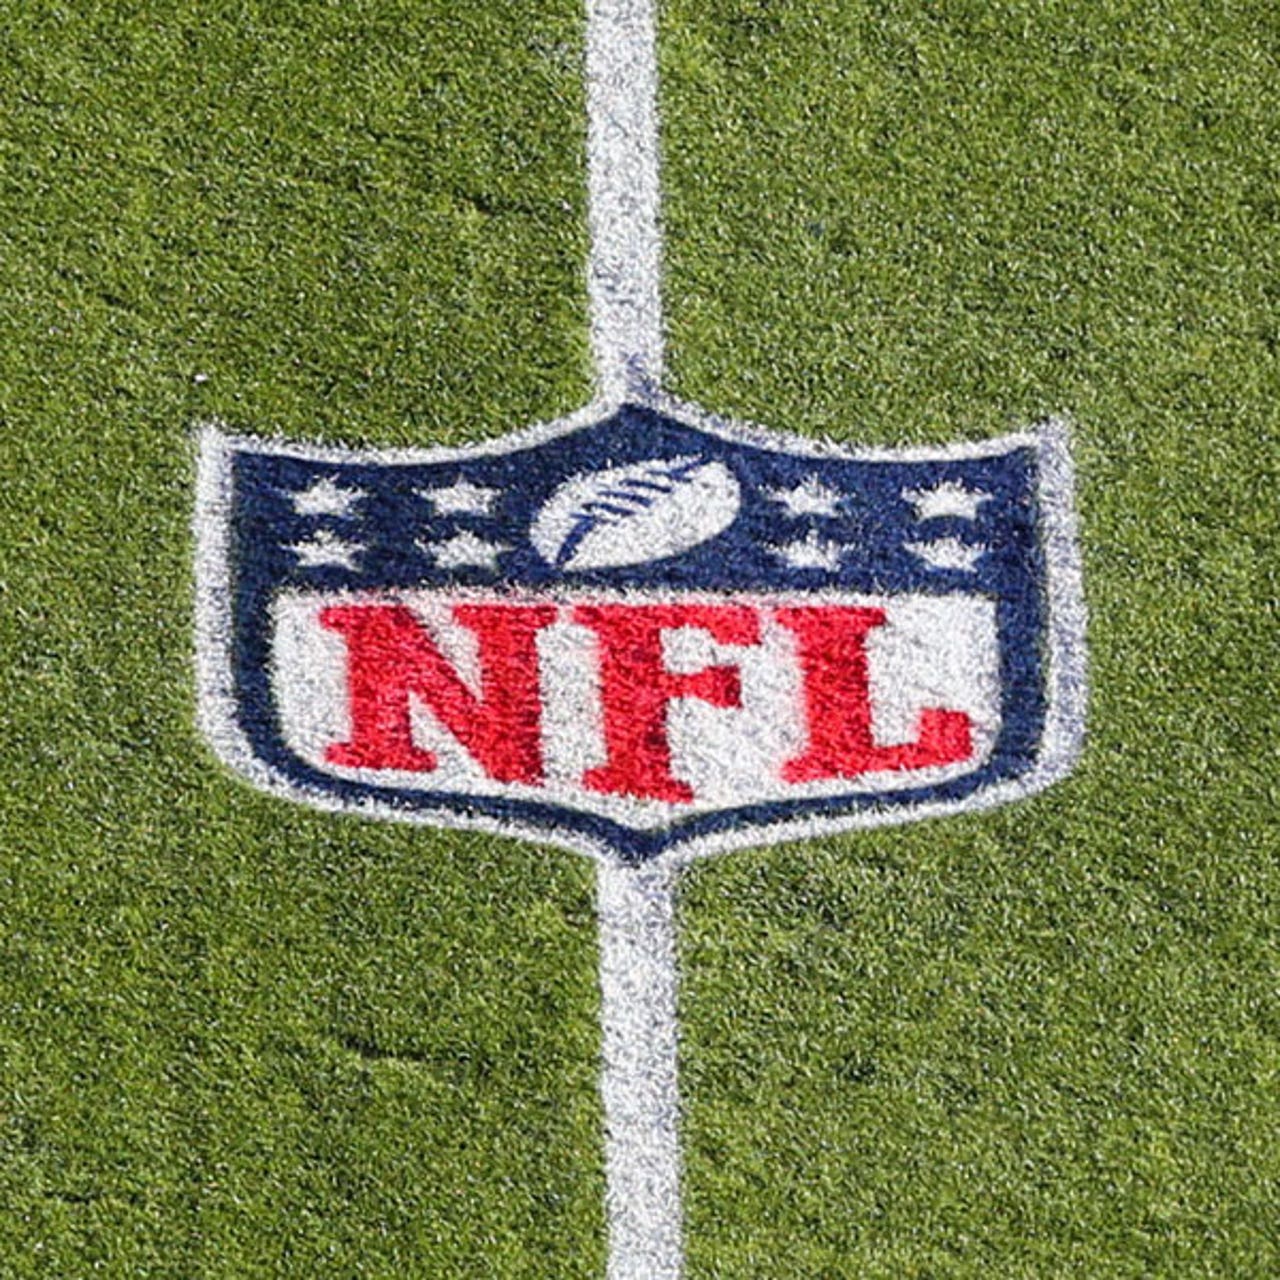 nfl playoff overtime rules 2022